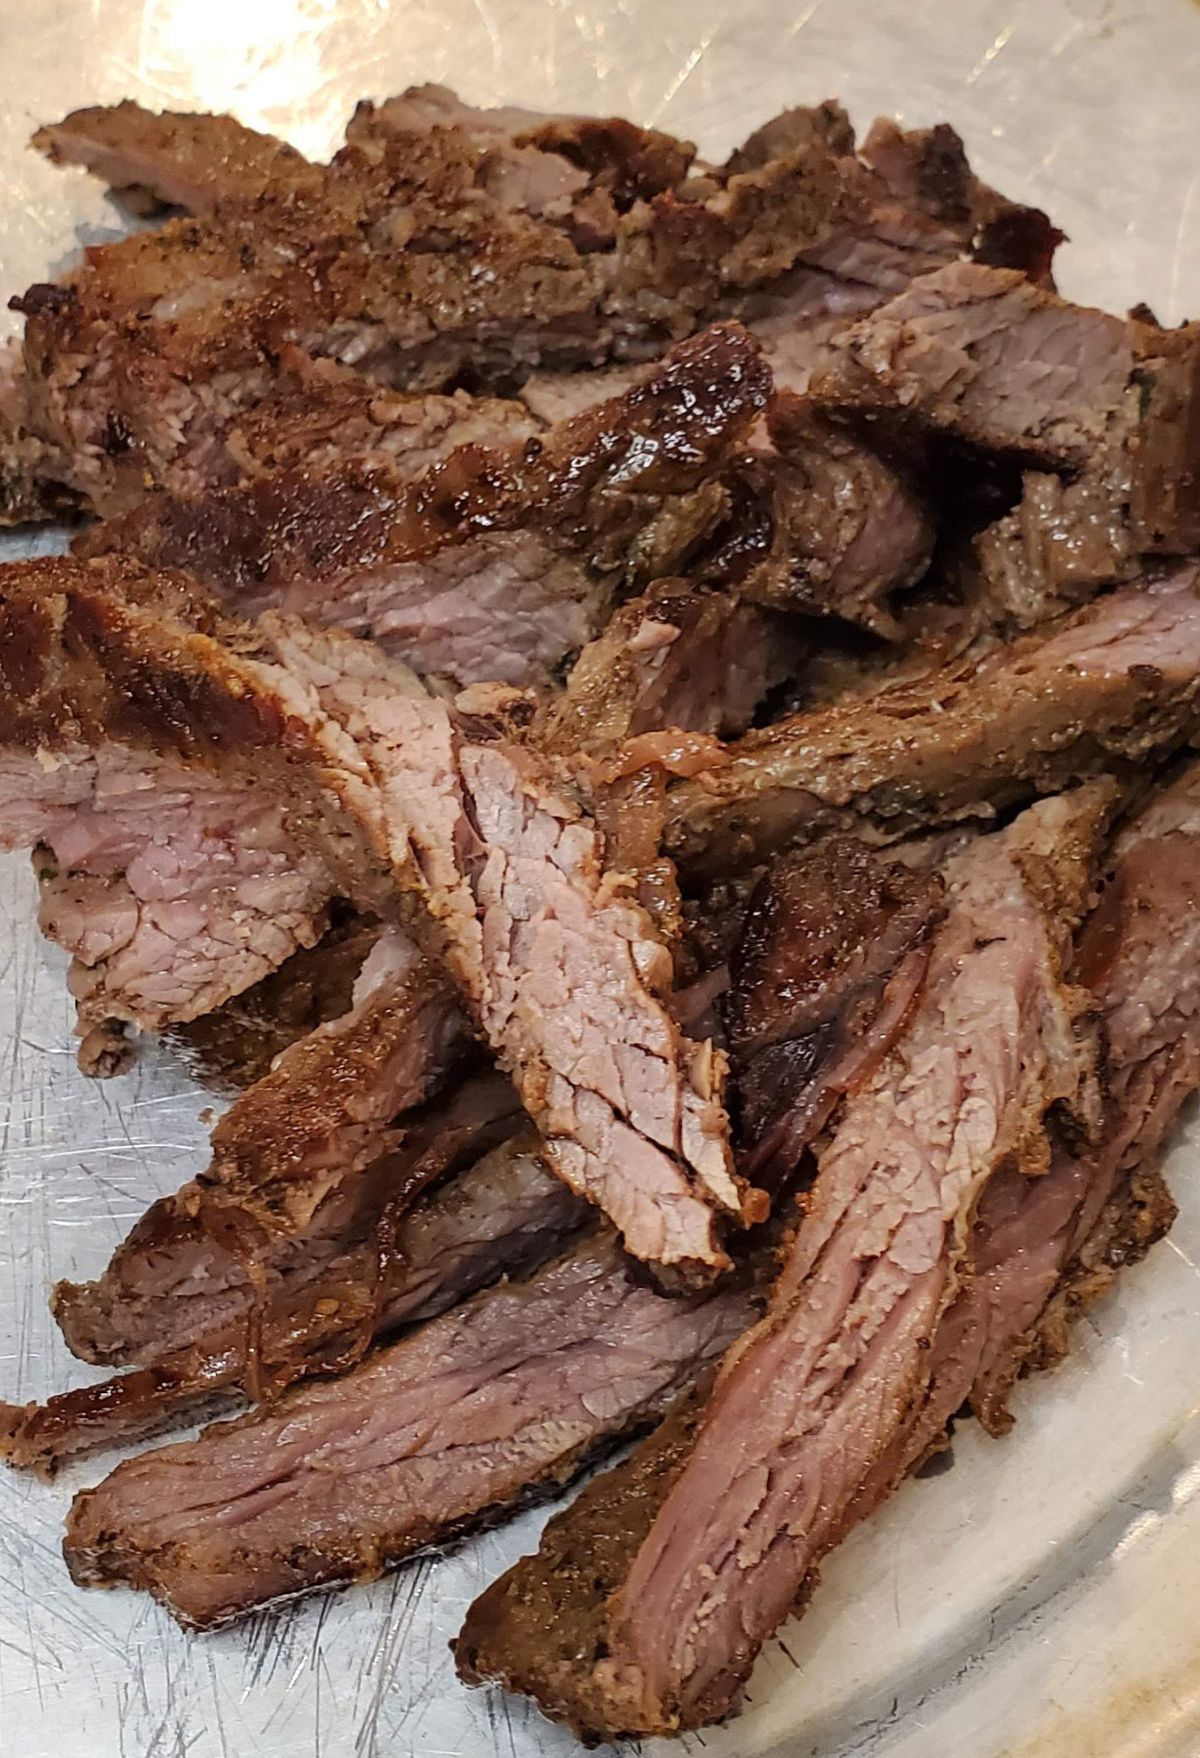 Sliced grilled steak on a metal tray, showing juicy, medium-cooked meat with a light brown crust.